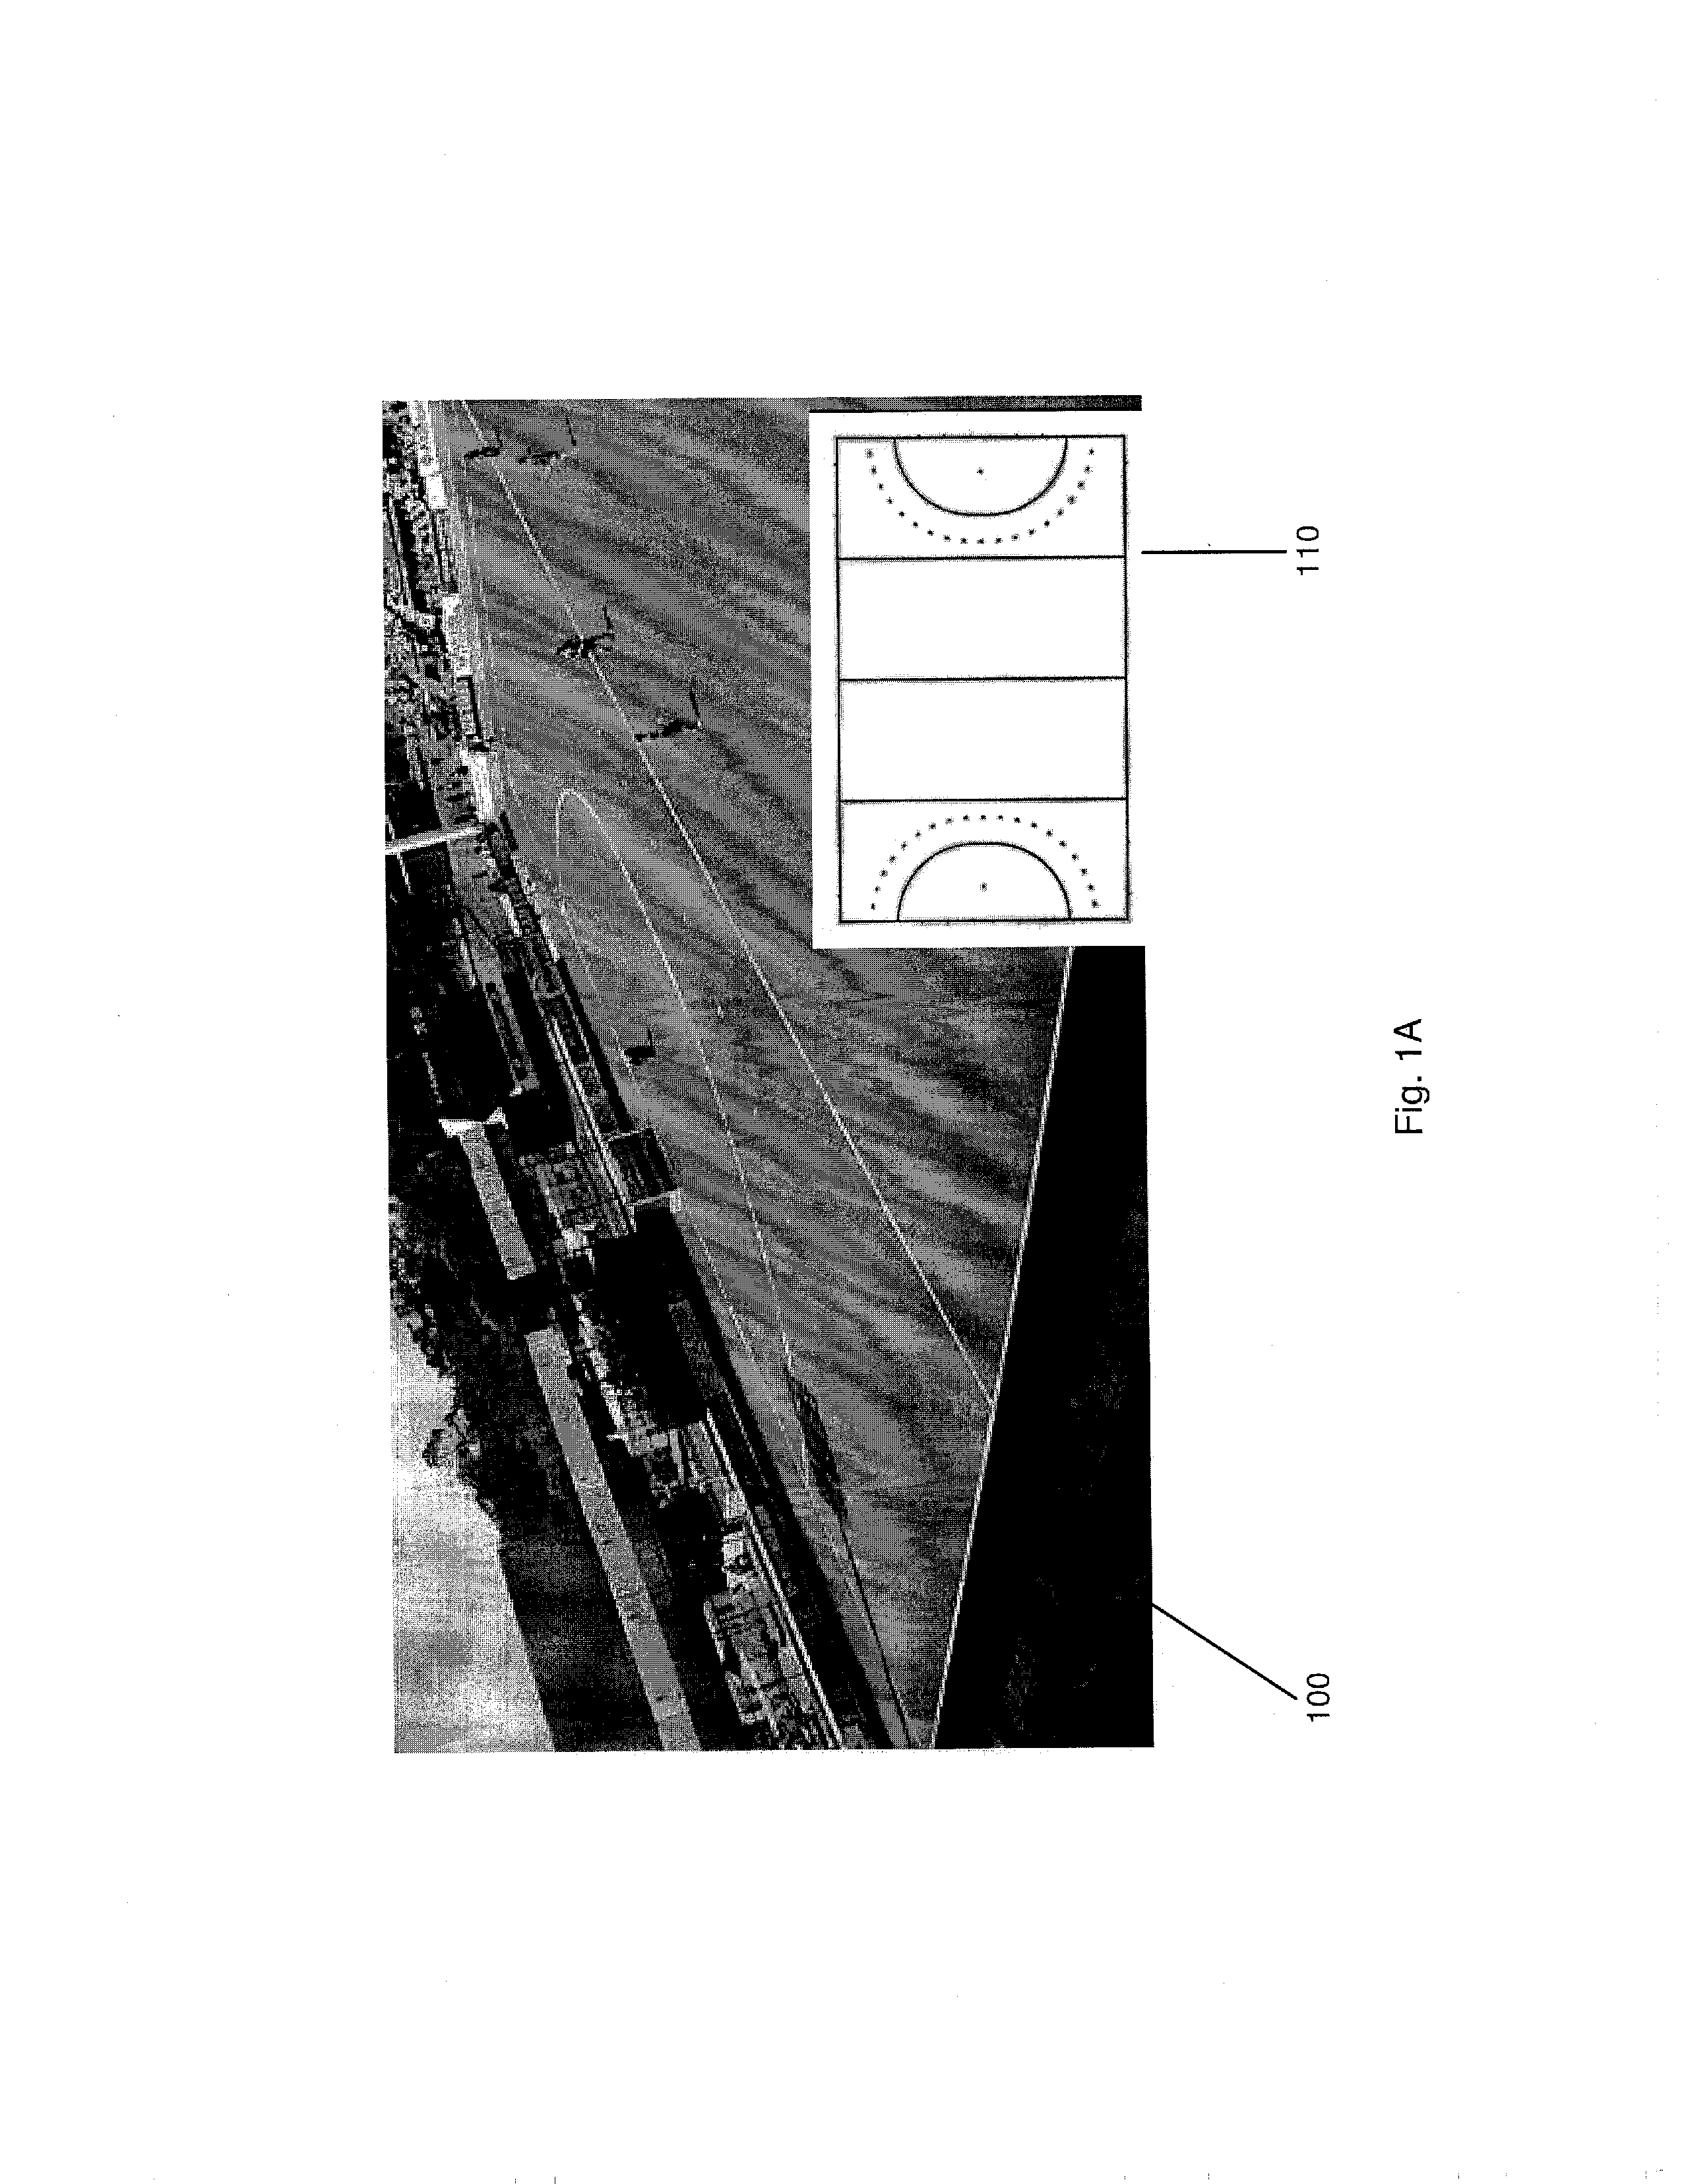 Method And System For Determining Camera Parameters From A Long Range Gradient Based On Alignment Differences In Non-Point Image Landmarks